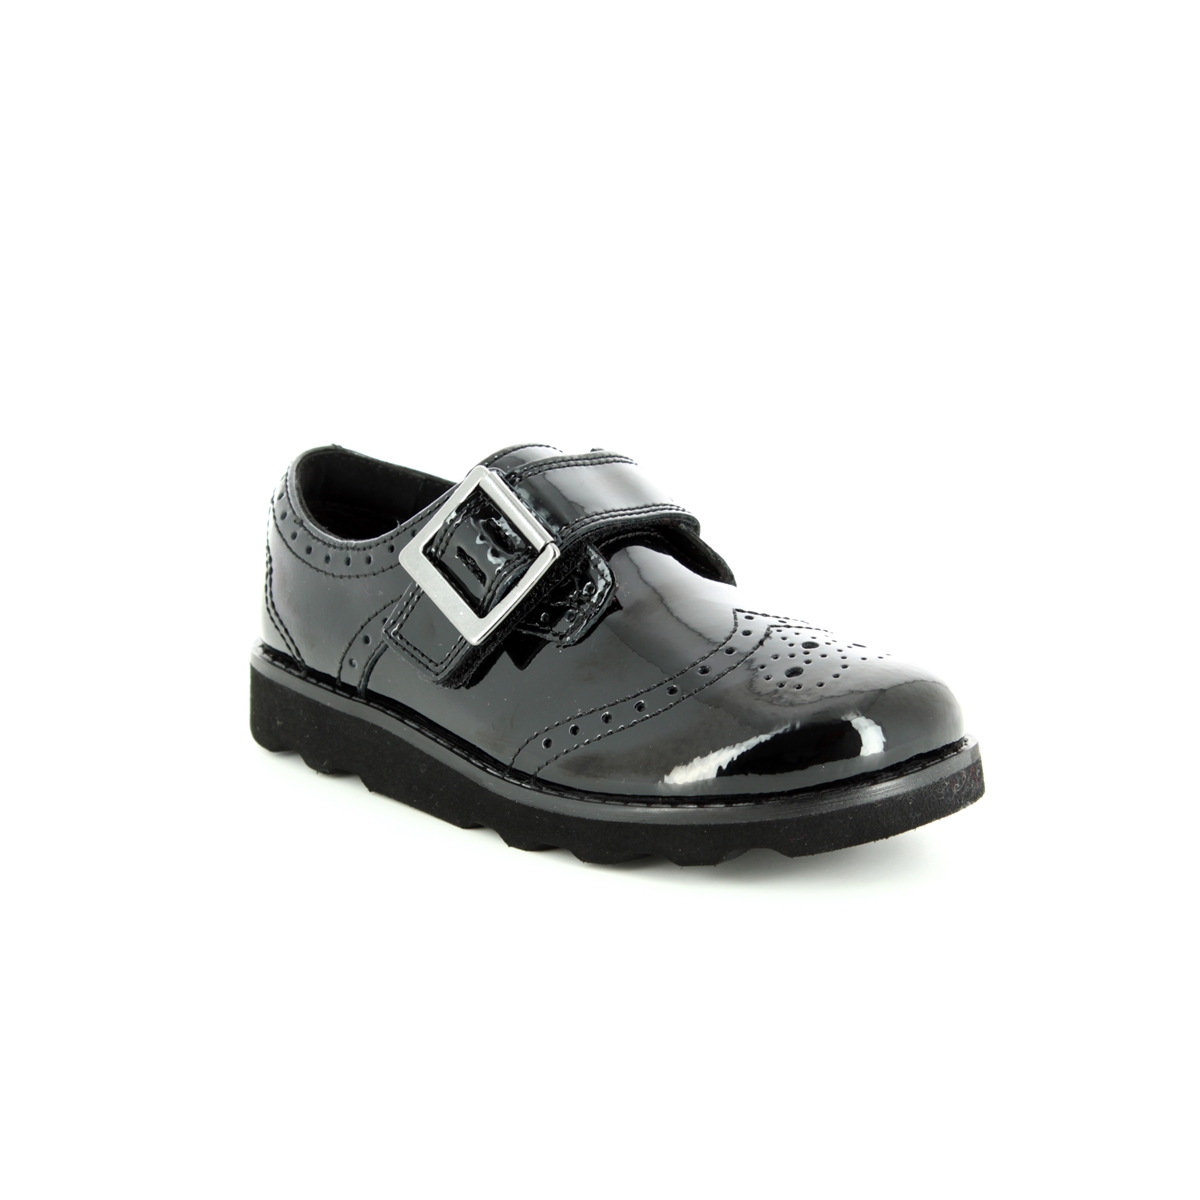 Clarks Pride In F Black patent everyday shoes